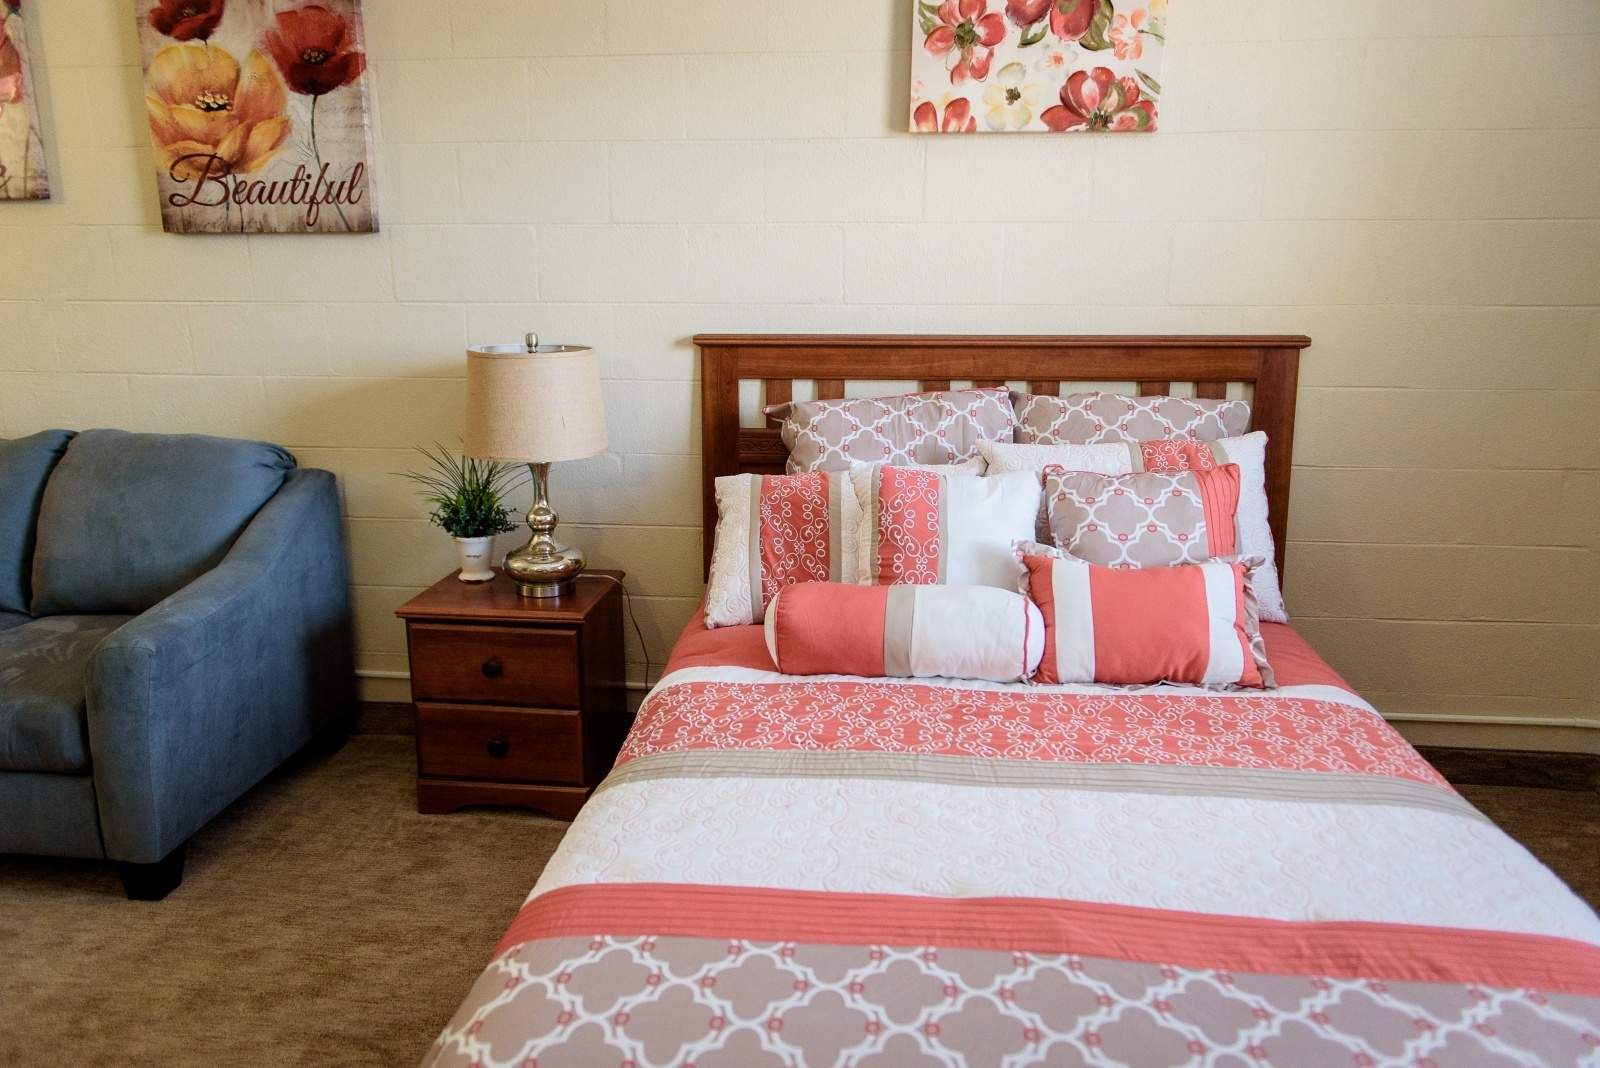 Vintage Care senior living community bedroom with cozy furniture and home decor.